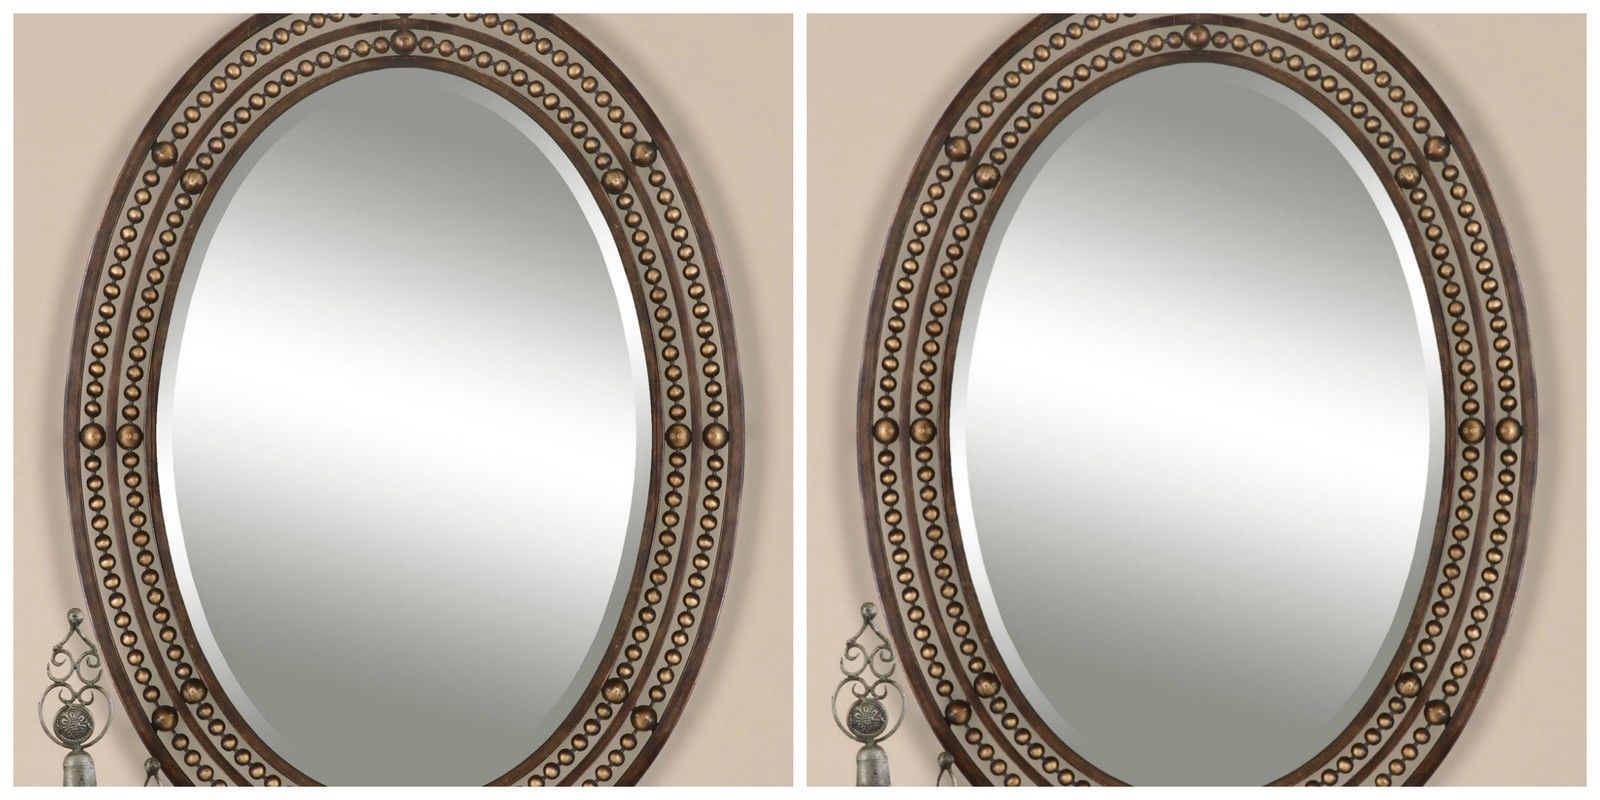 2 Mid Century Inspired Oil Rubbed Bronze Metal Oval Beveled Wall Vanity Within Woven Bronze Metal Wall Mirrors (View 4 of 15)